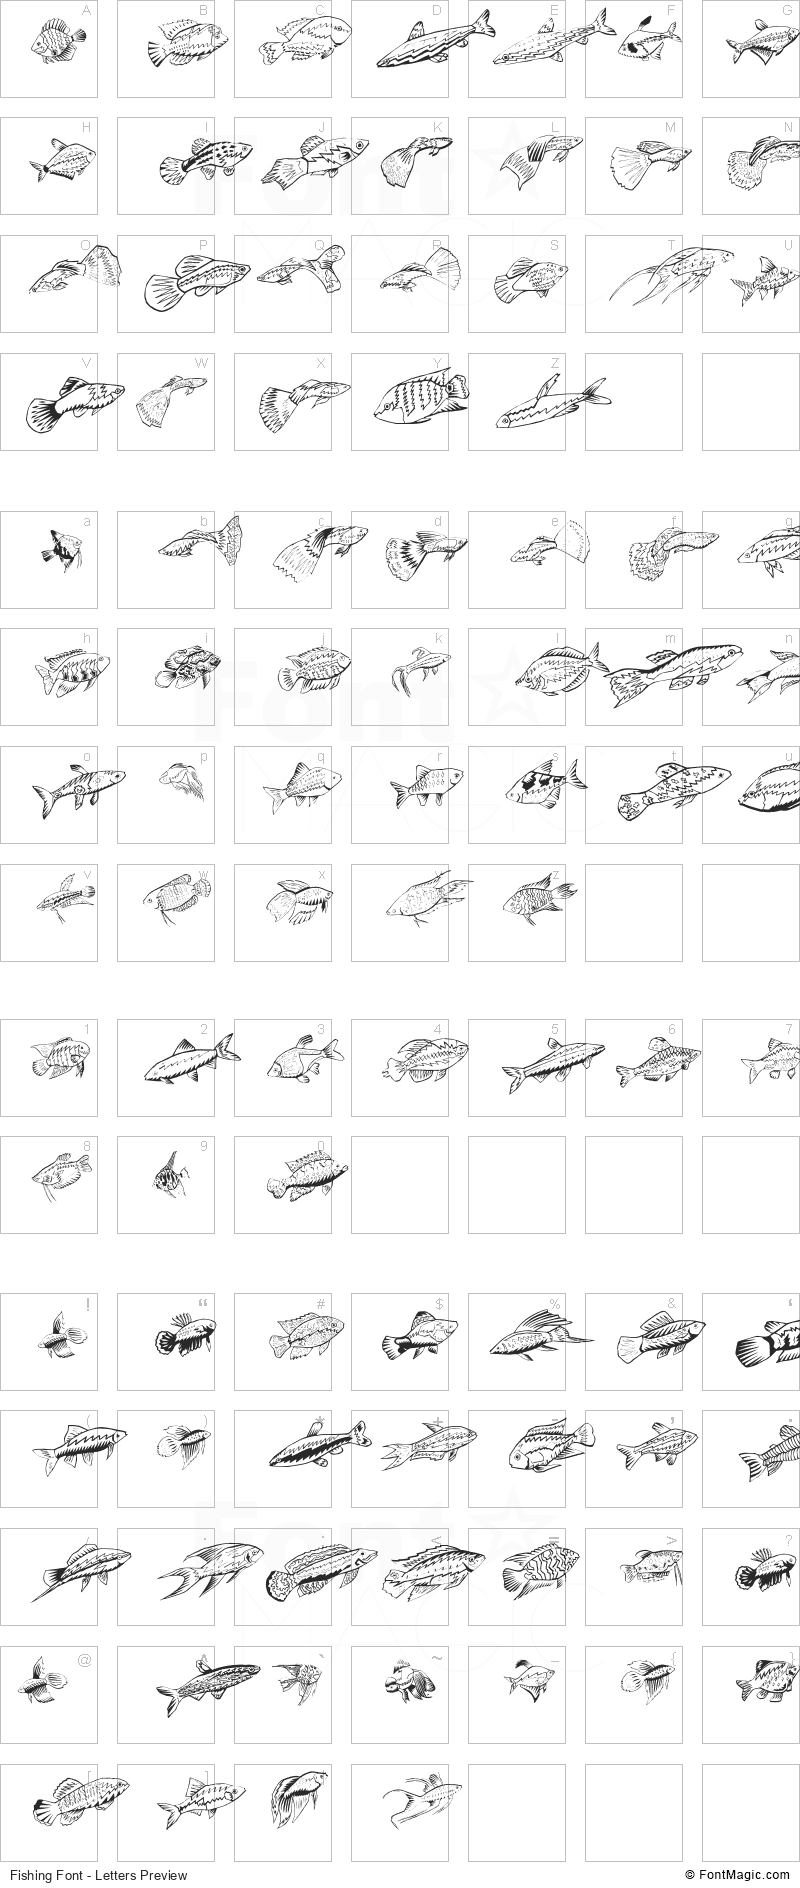 Fishing Font - All Latters Preview Chart